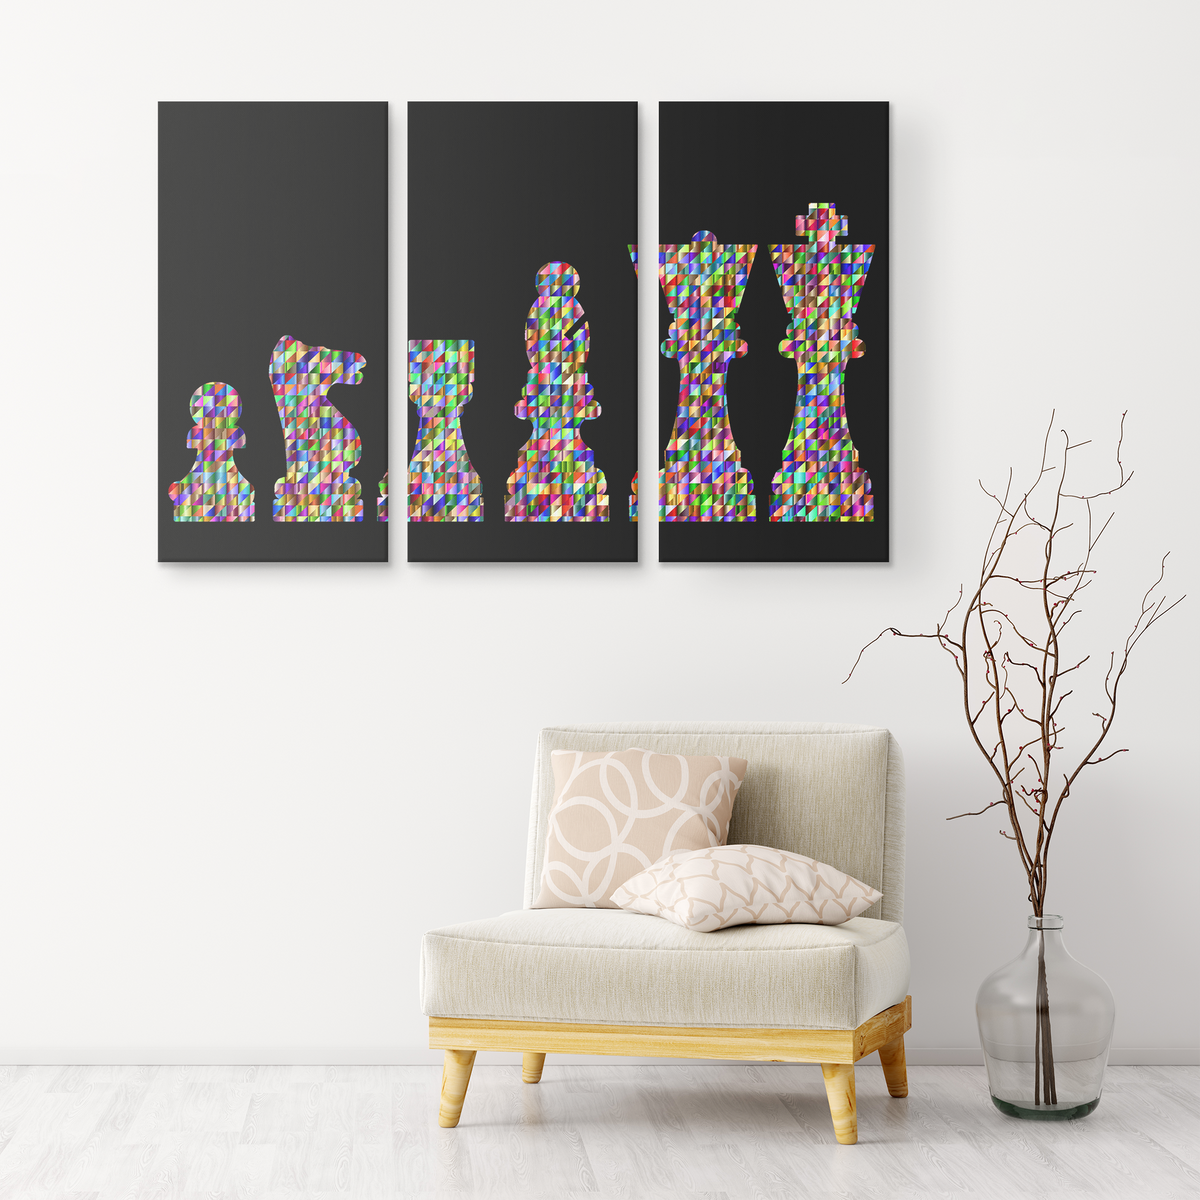 Chess prismatic chromatic warriors  - colorful 3 piece canvas wall art